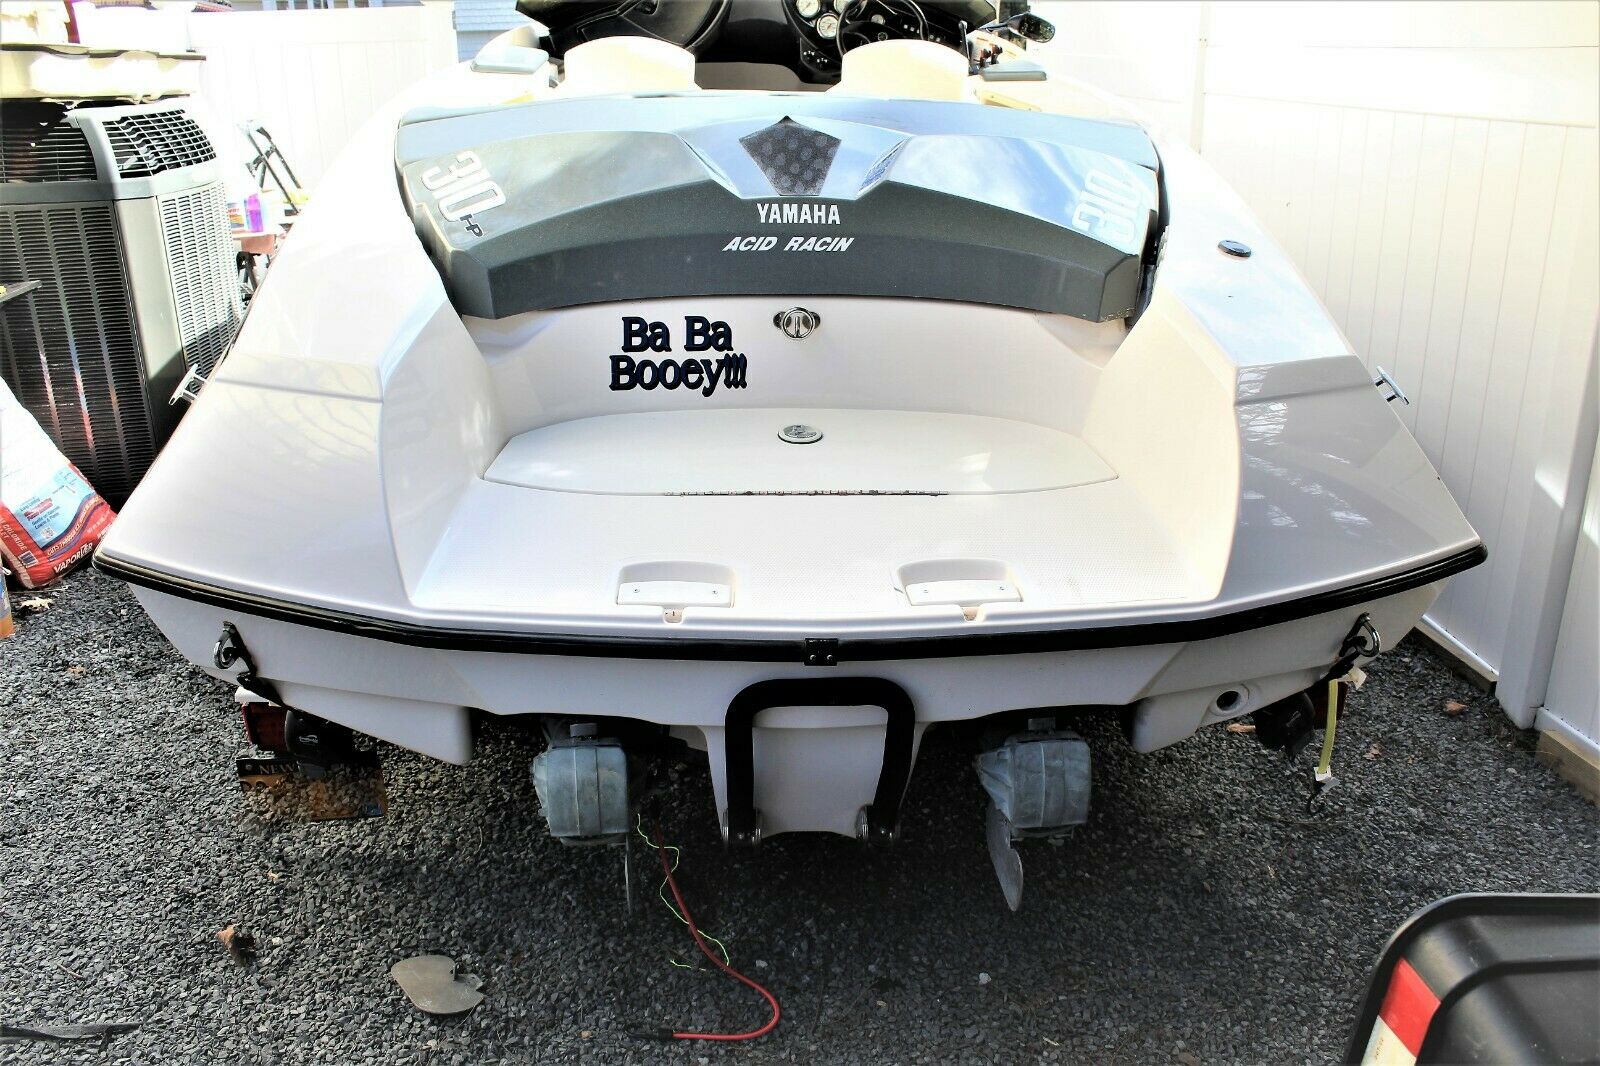 Yamaha XR1800 2001 for sale for $9,500 - Boats-from-USA.com